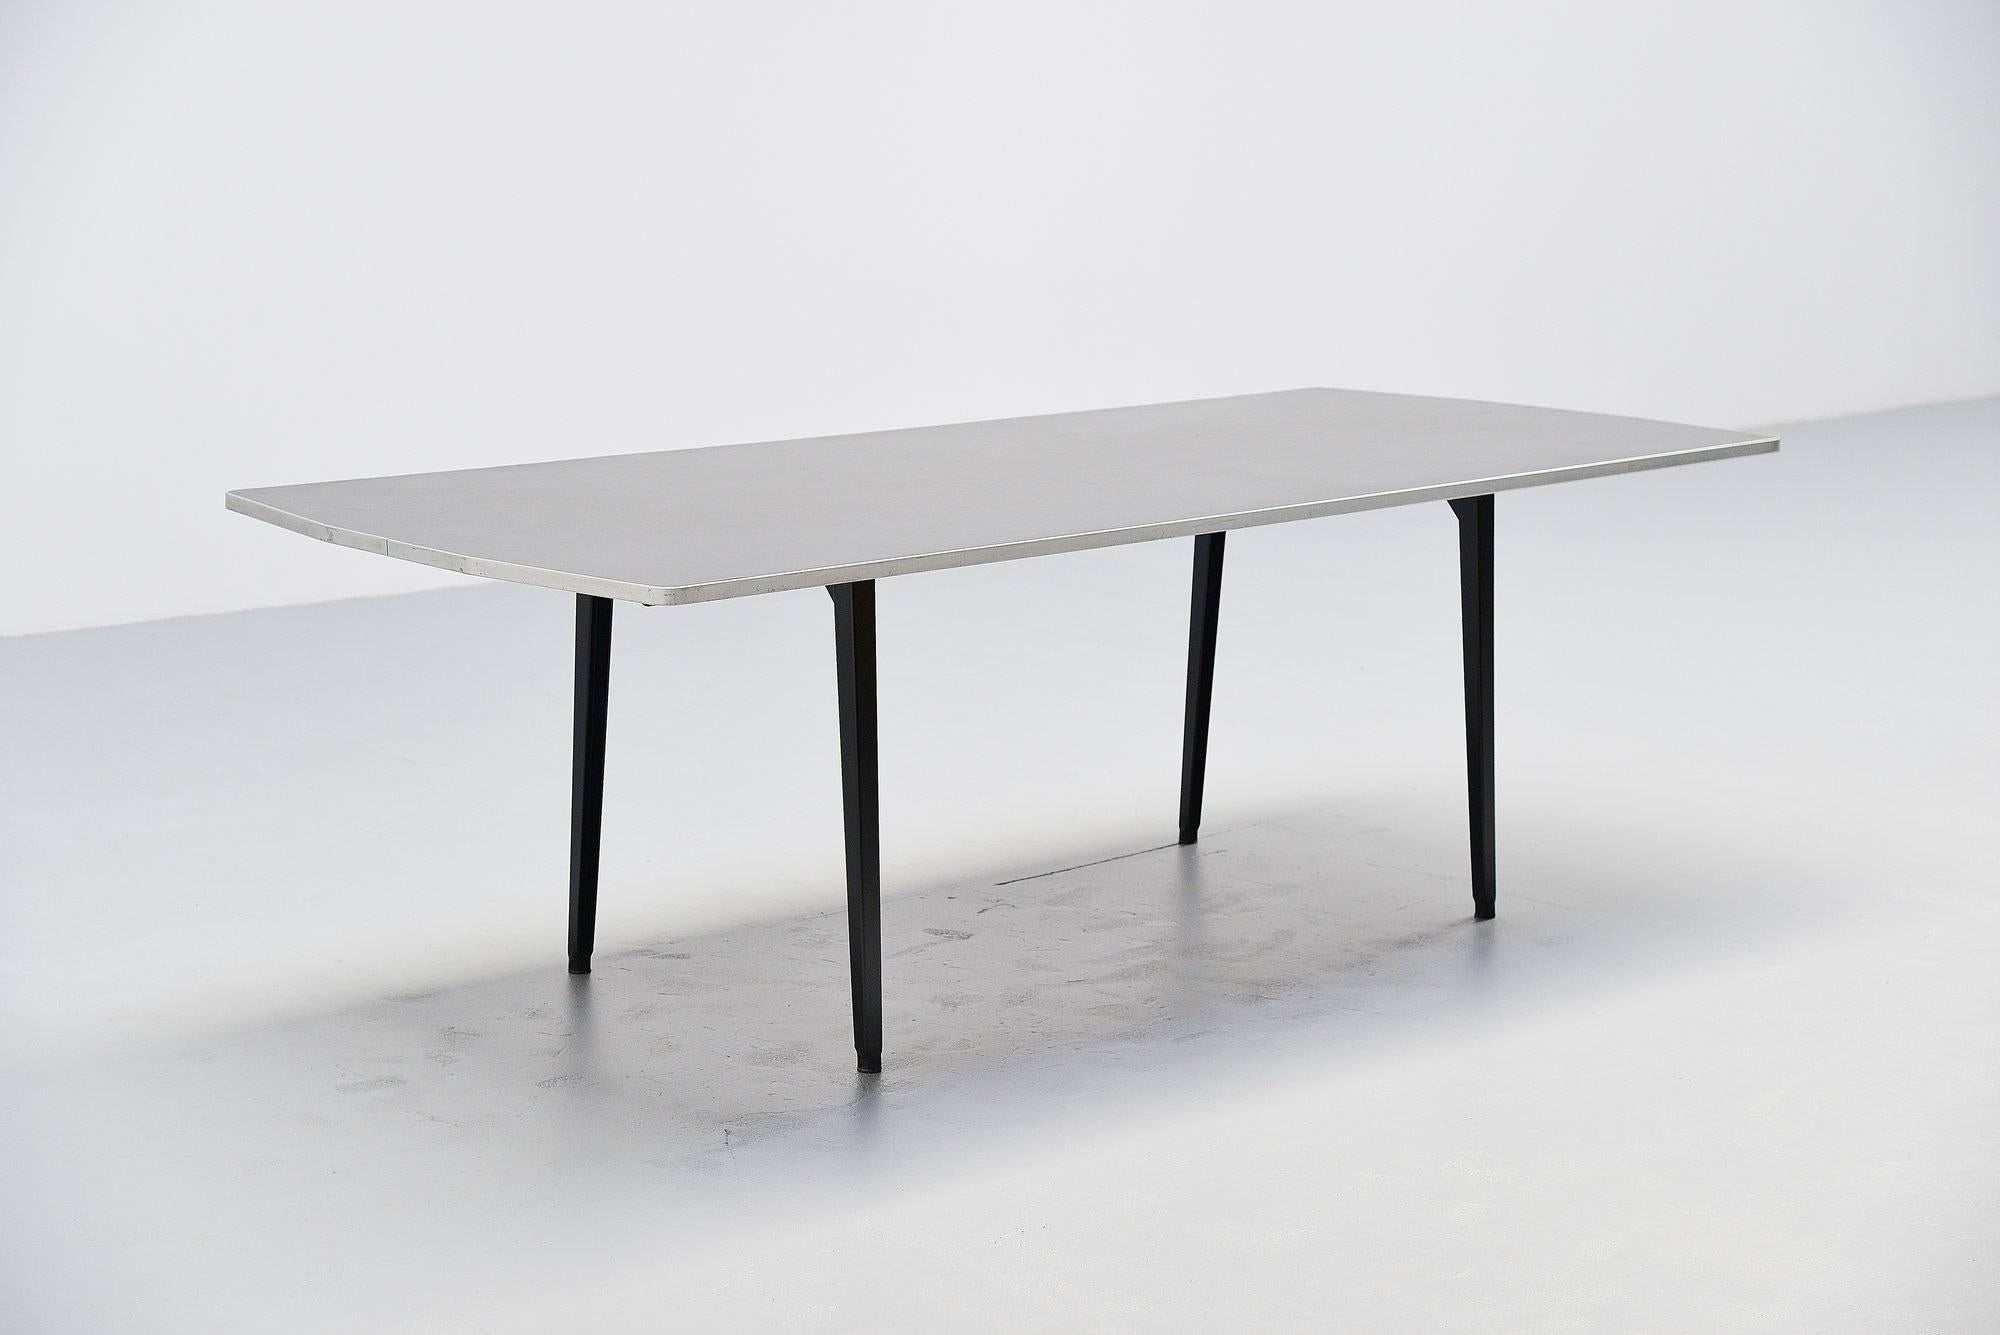 Nice and rare industrial table designed by Friso Kramer for Ahrend de Cirkel, Holland 1955. This example is from March 1962, stamped at the bottom of the table top. This table is the largest version made, 240 cm. This is the nicest version with